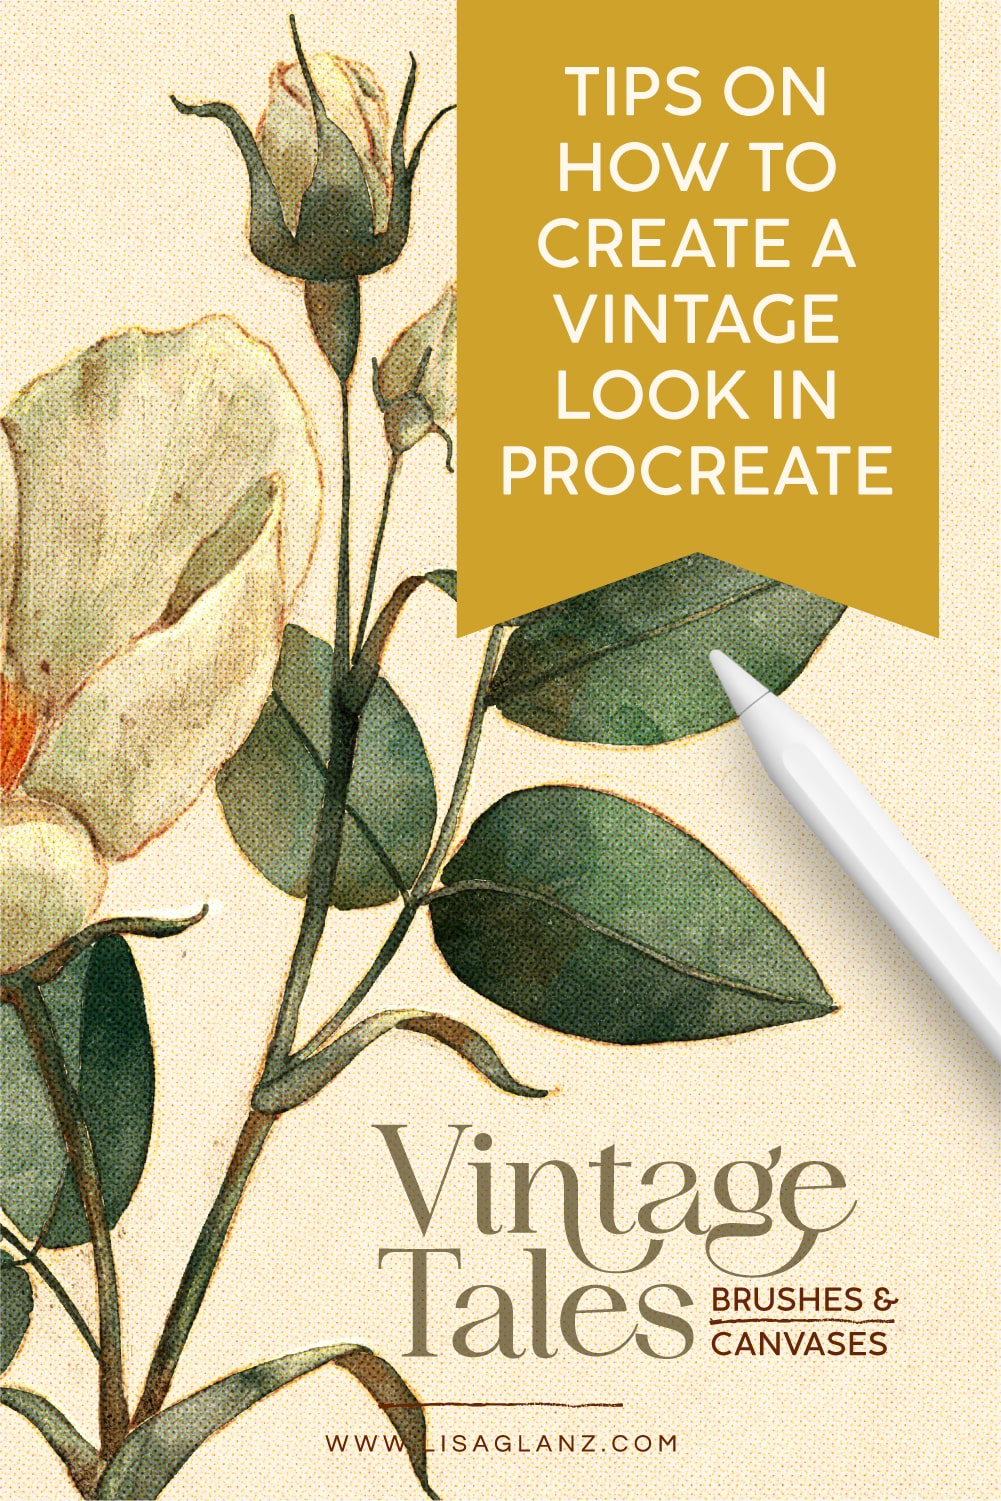 Tips on how to create a vintage look in Procreate